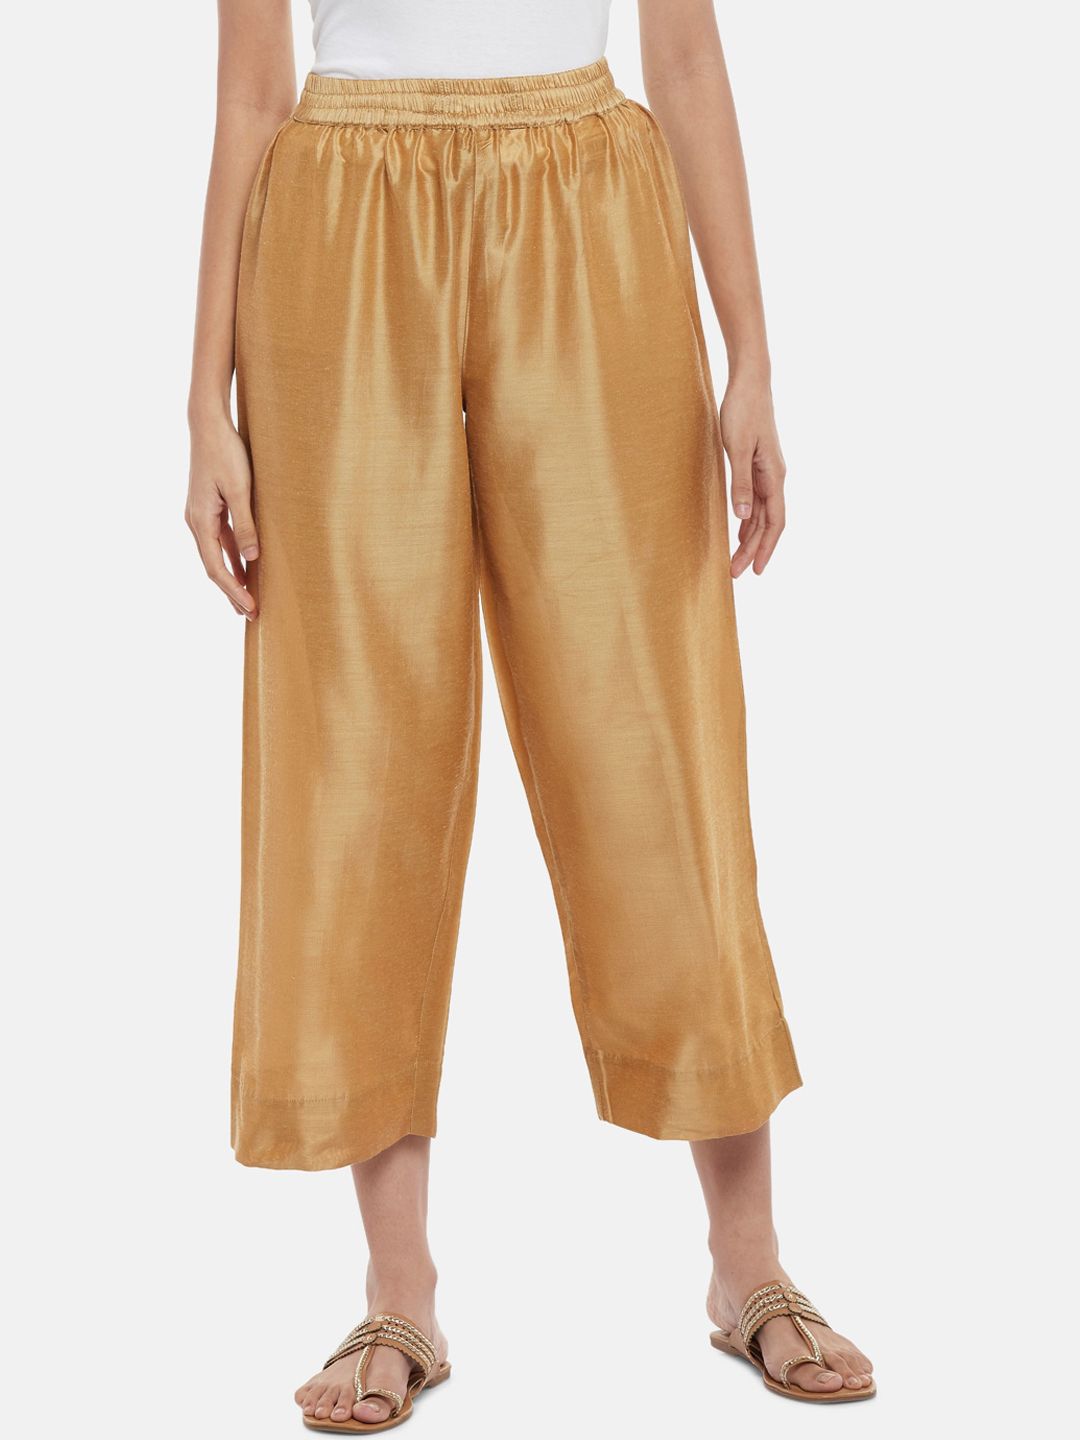 RANGMANCH BY PANTALOONS Women Gold-Toned Culottes Trousers Price in India